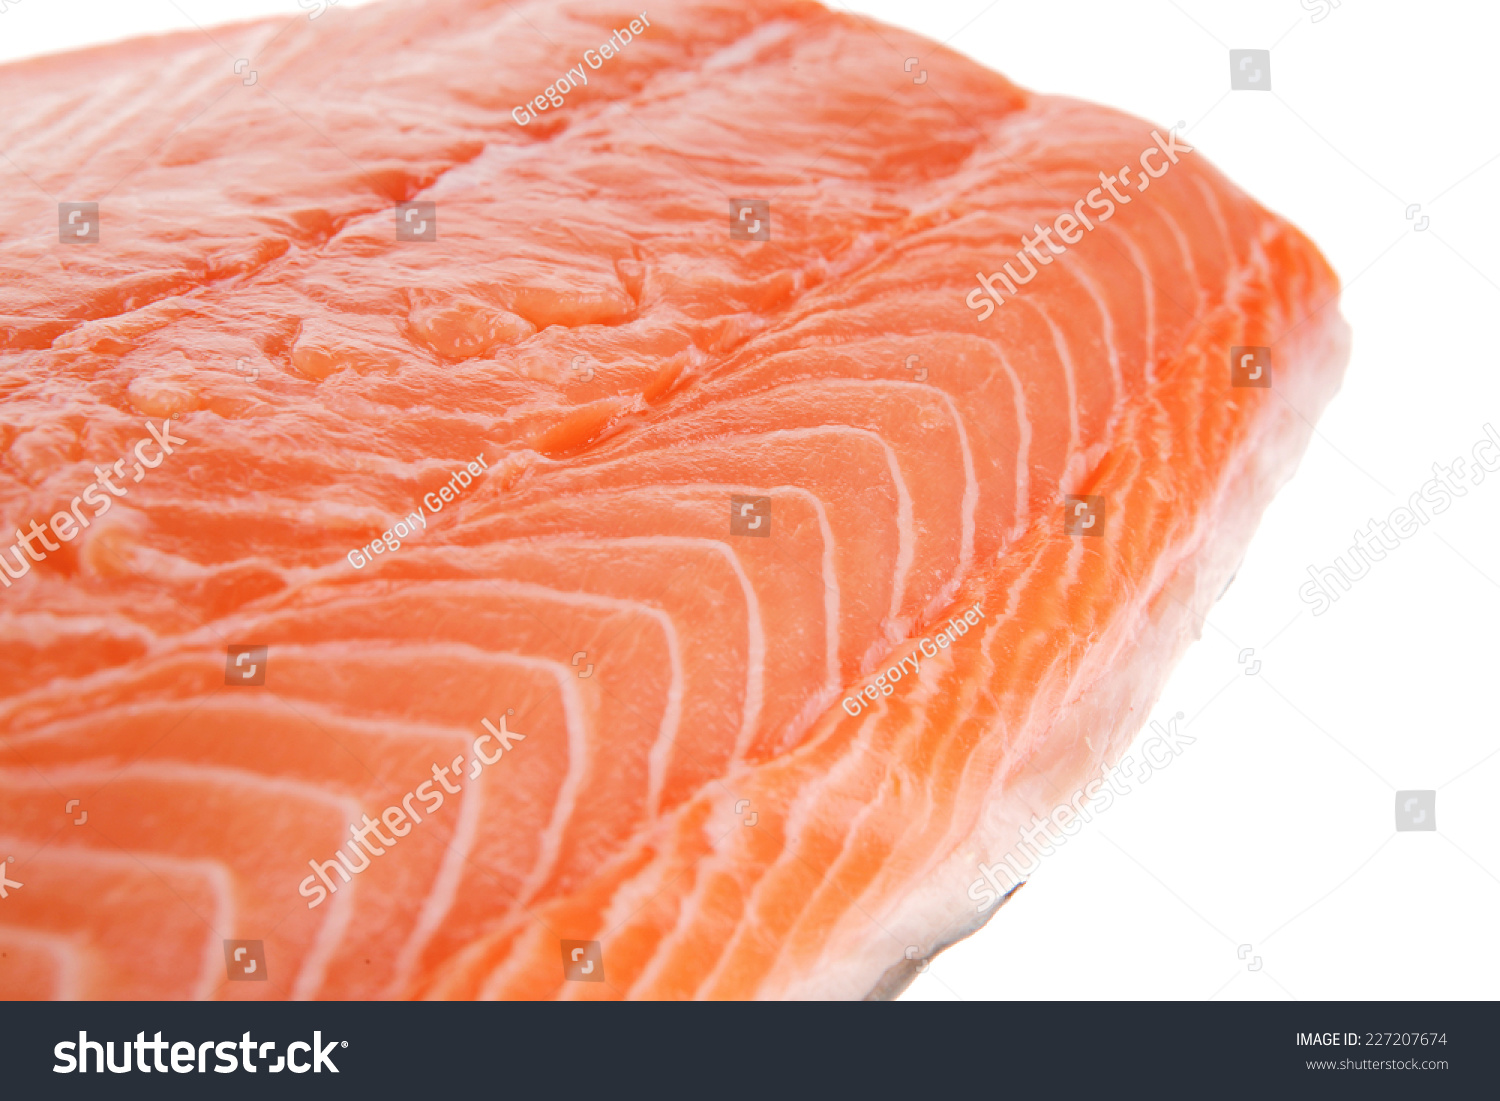 Fresh Uncooked Red Fish Fillet Over White Stock Photo 227207674 ...